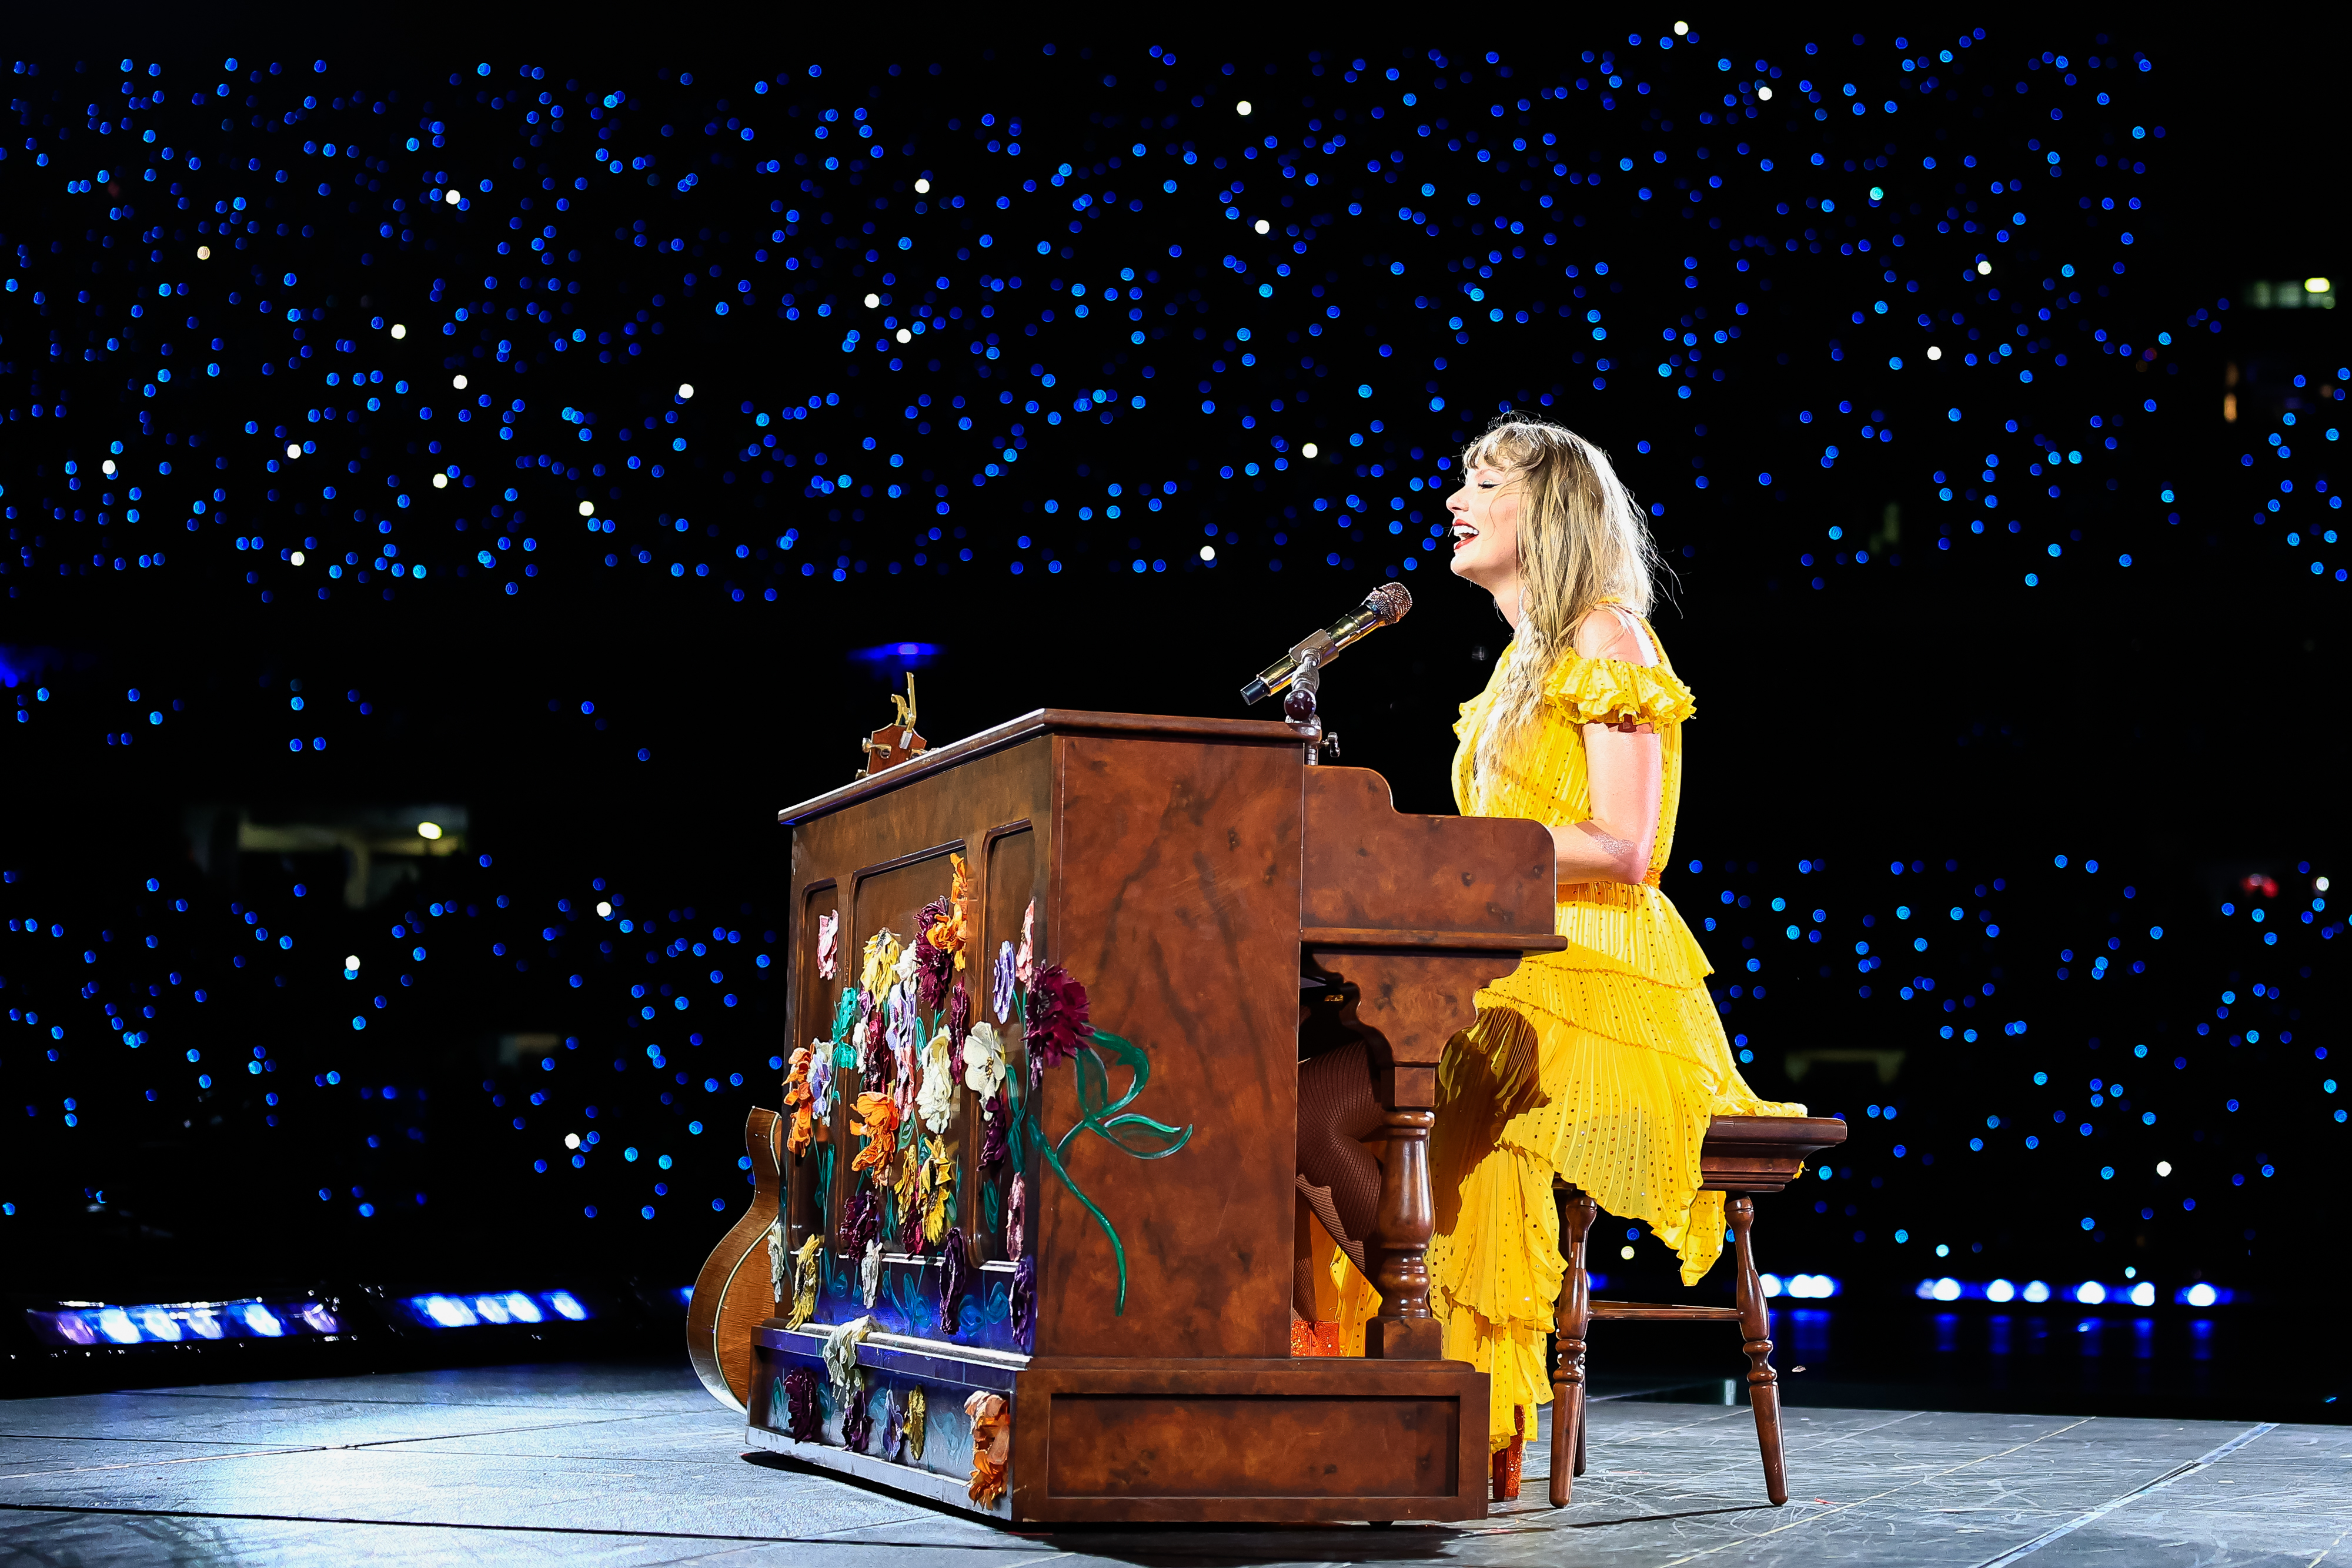 taylor playing piano on stage